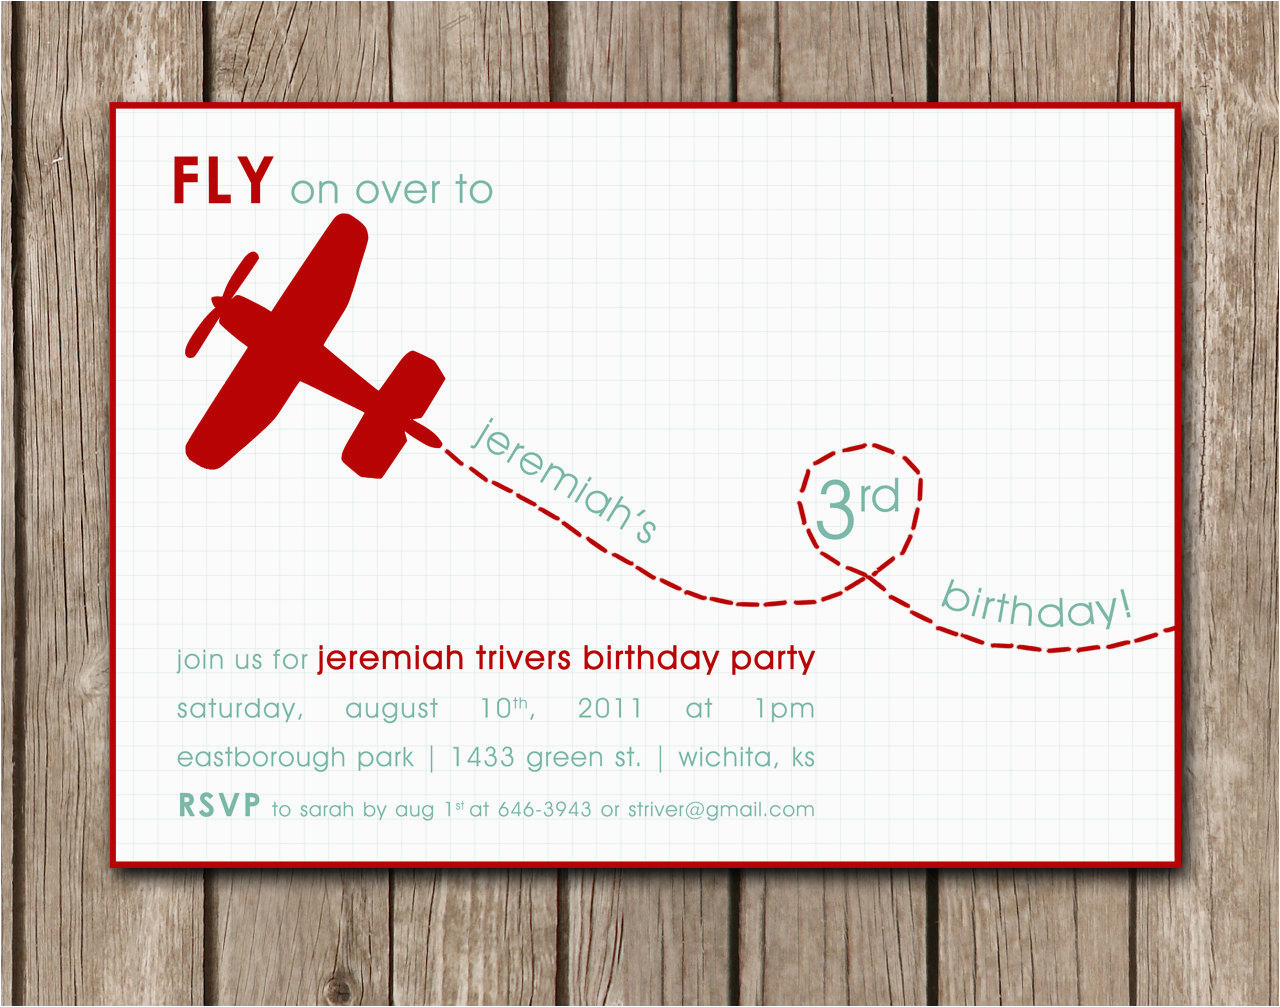 printed airplane birthday party invitation perfect for an